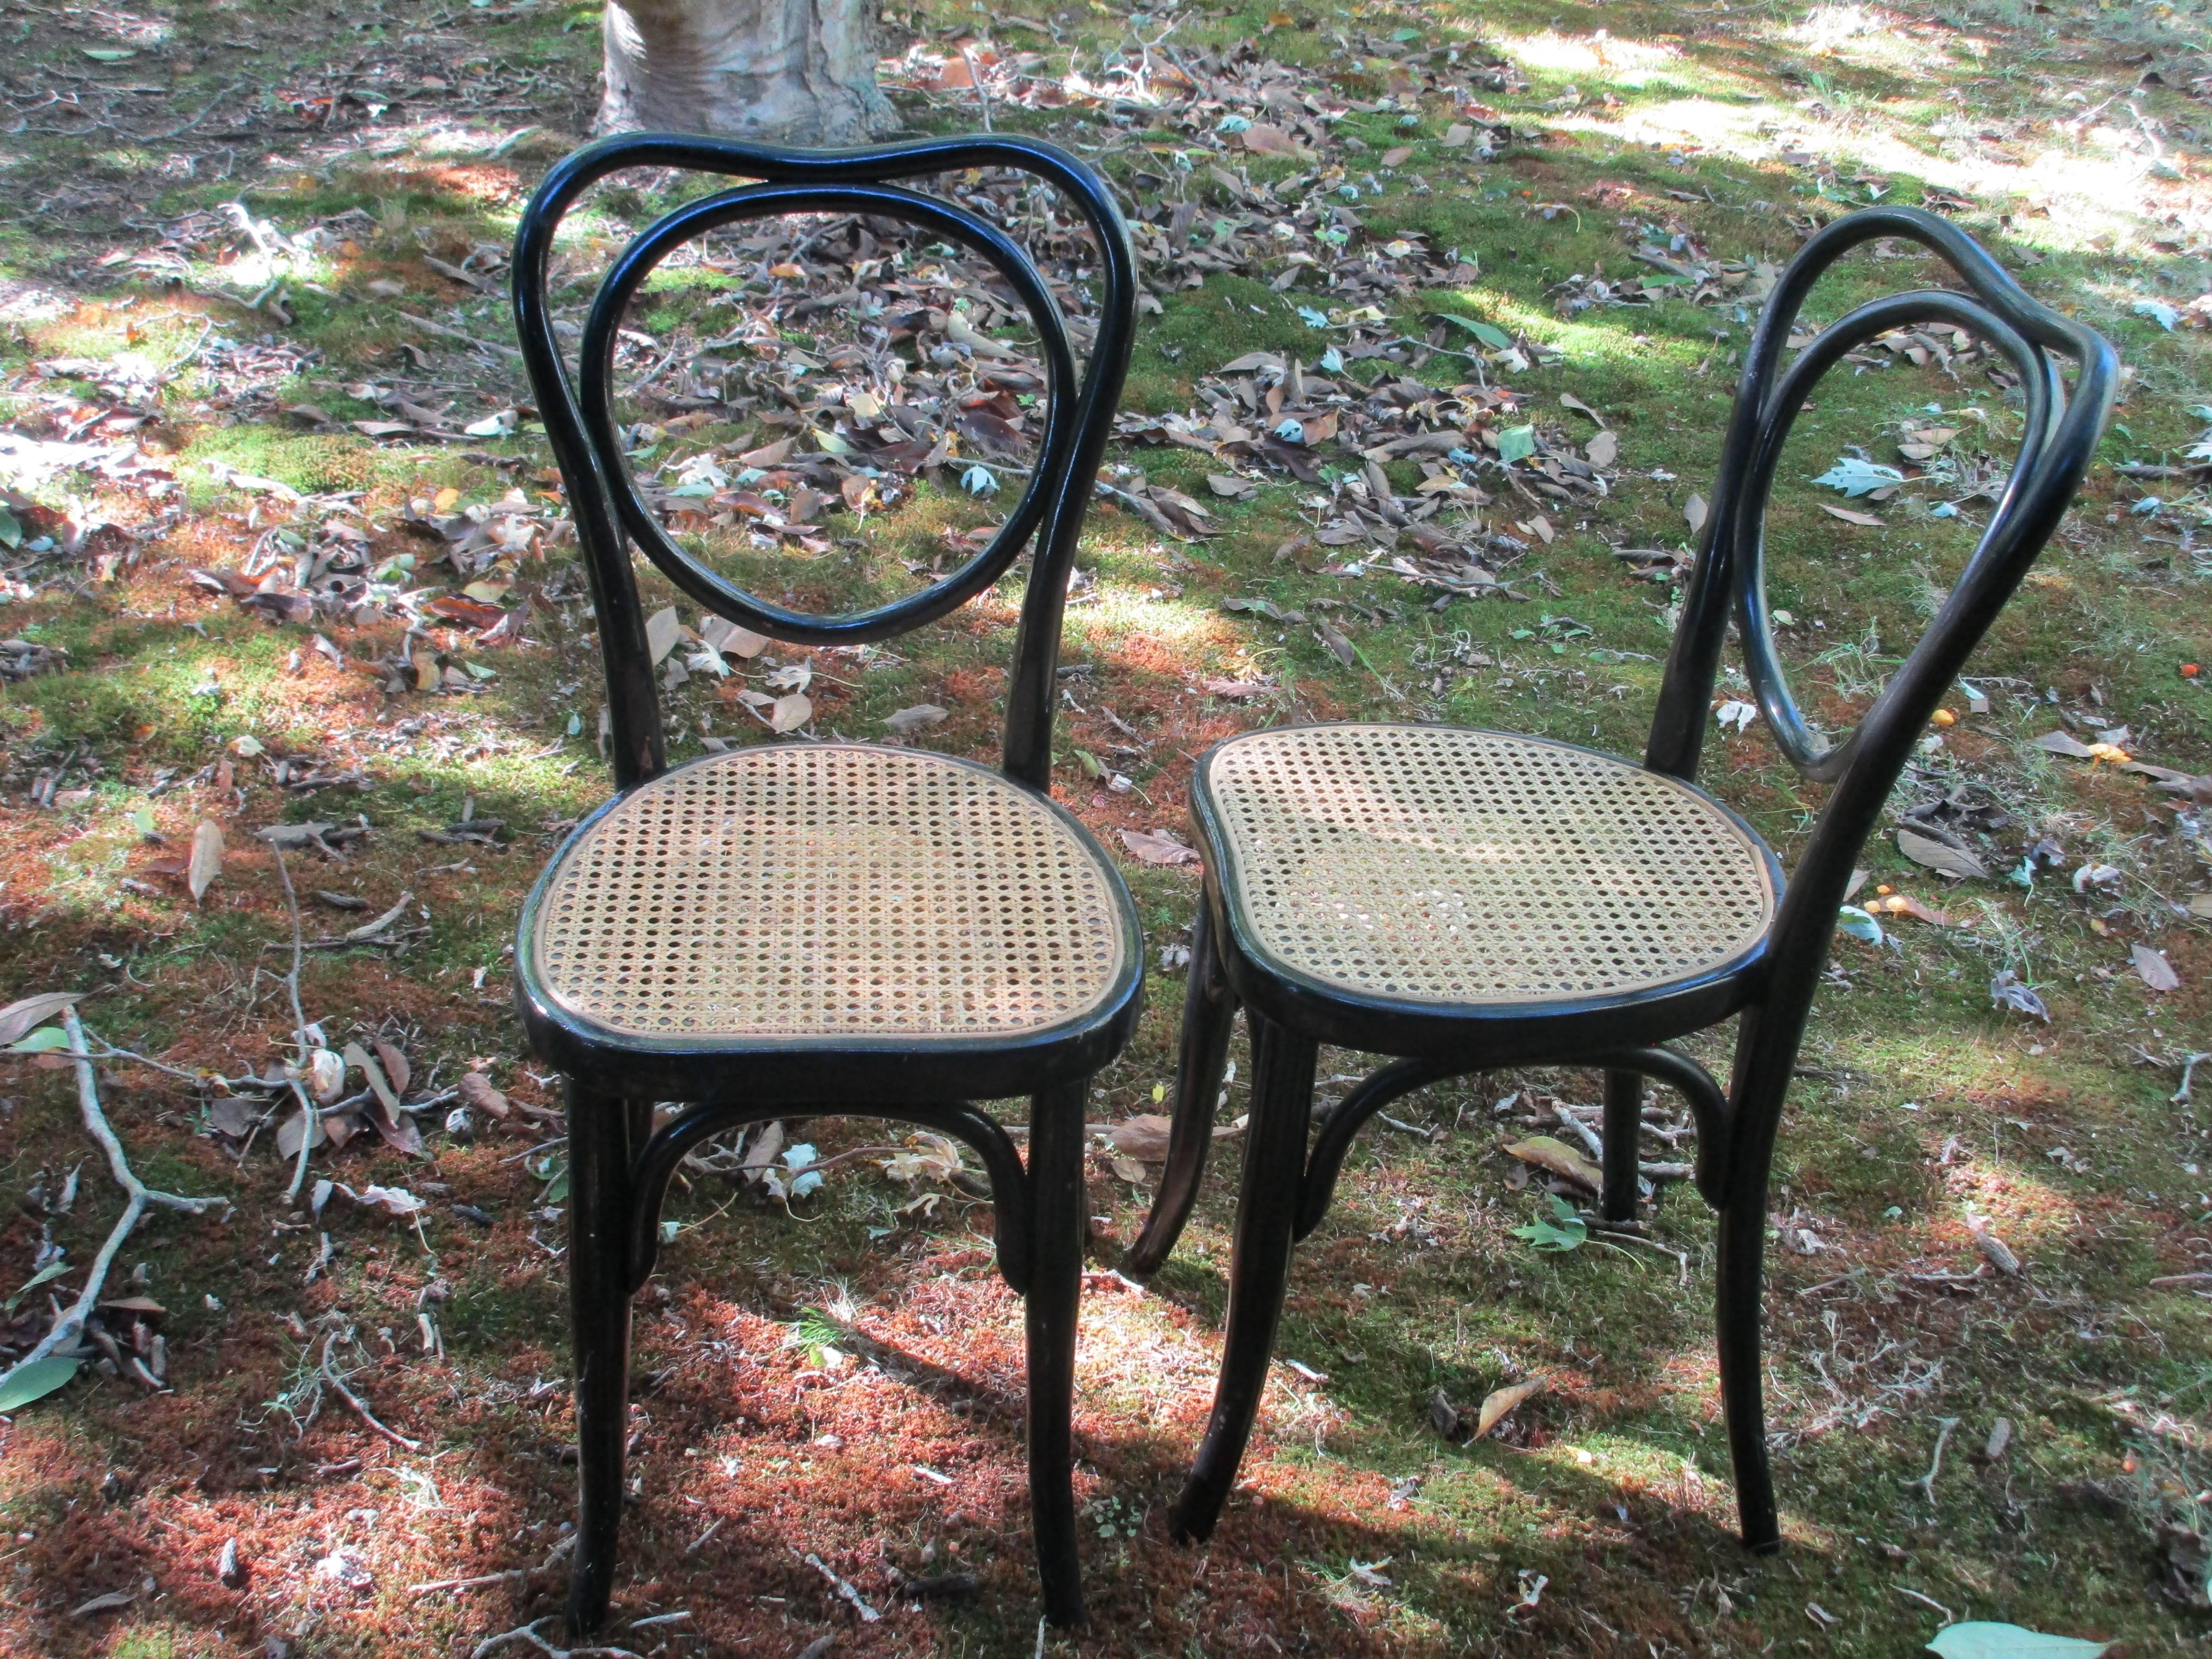 Twenty four available J J Kohn 19th century Austrian bentwood ebonized chairs from the Estate of Billy Wilder can be sold in a set of six or eight

caning has been replaced.